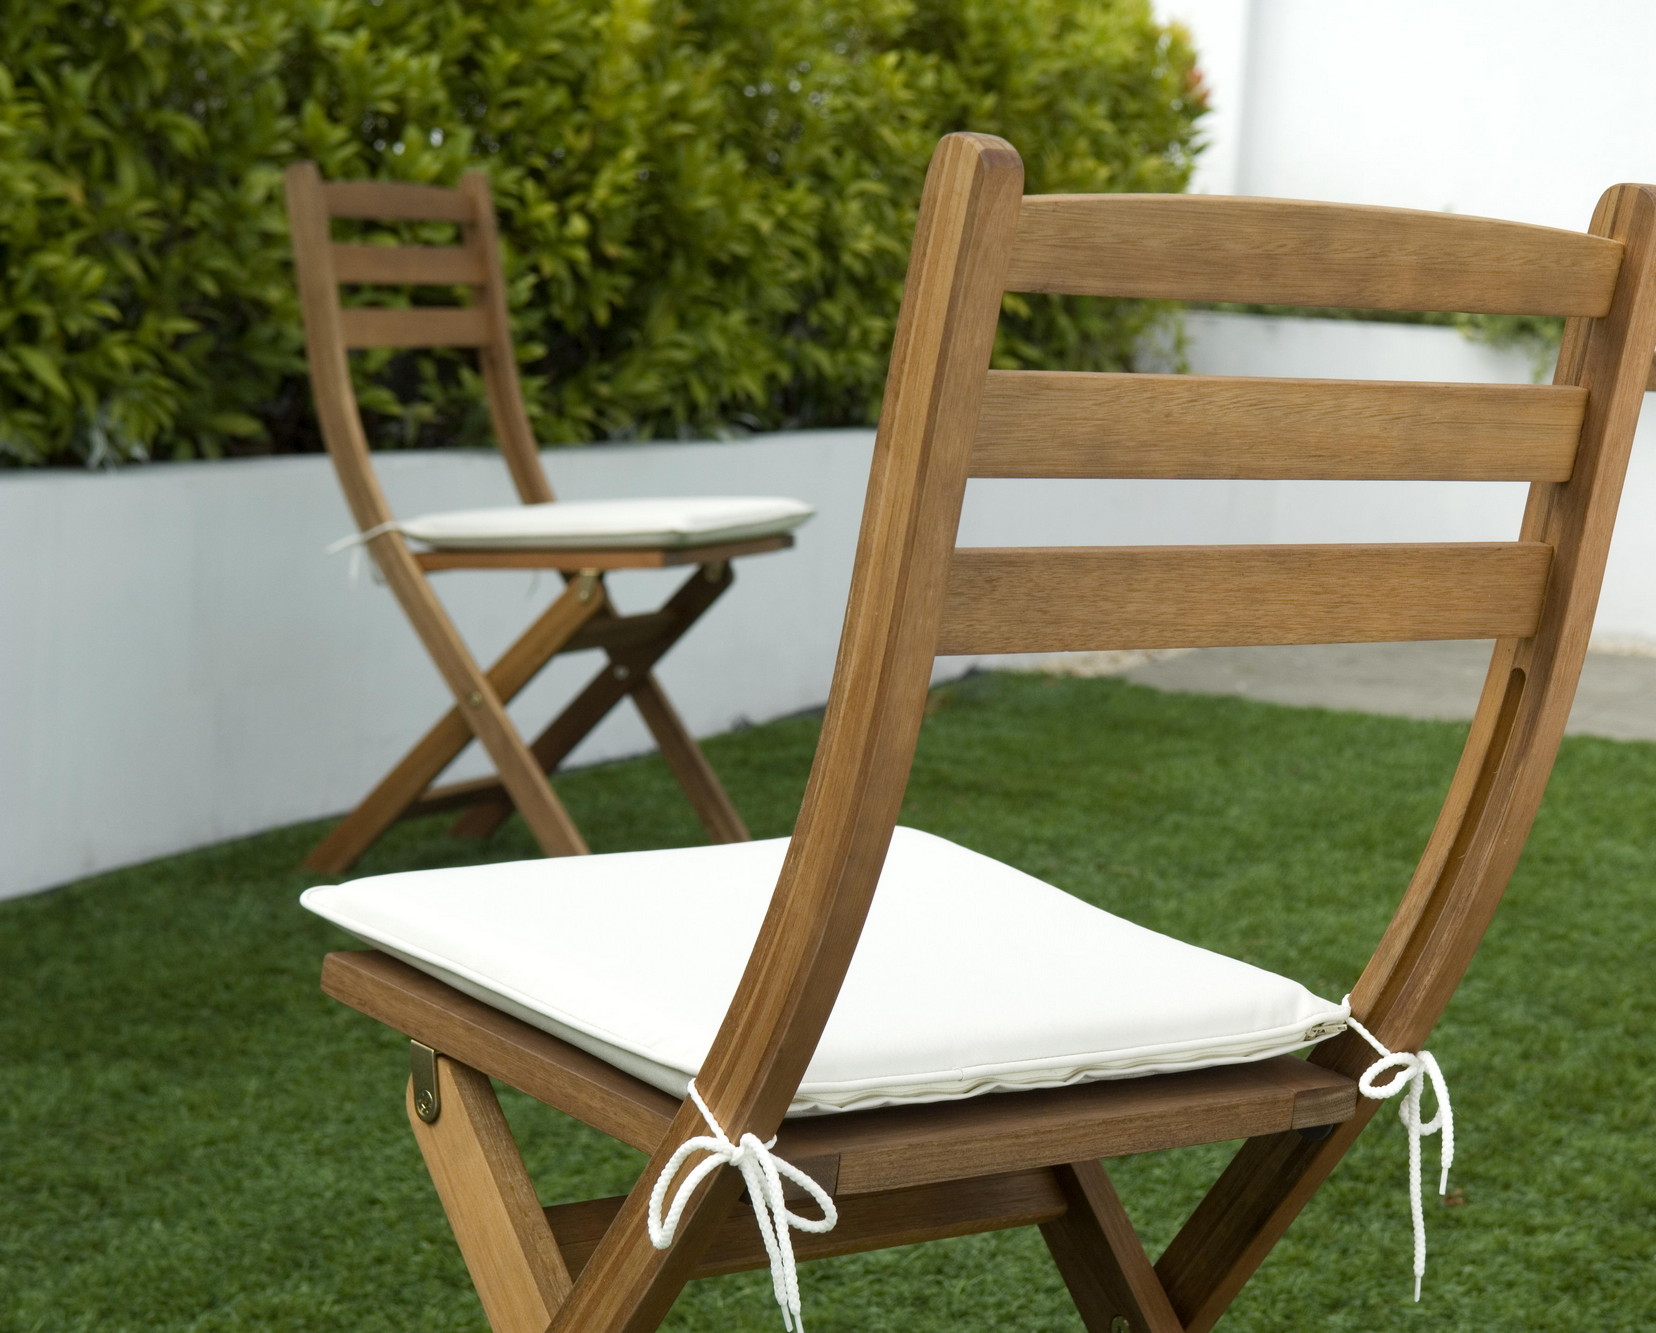 Cool Choose the right style and size wooden garden recliners